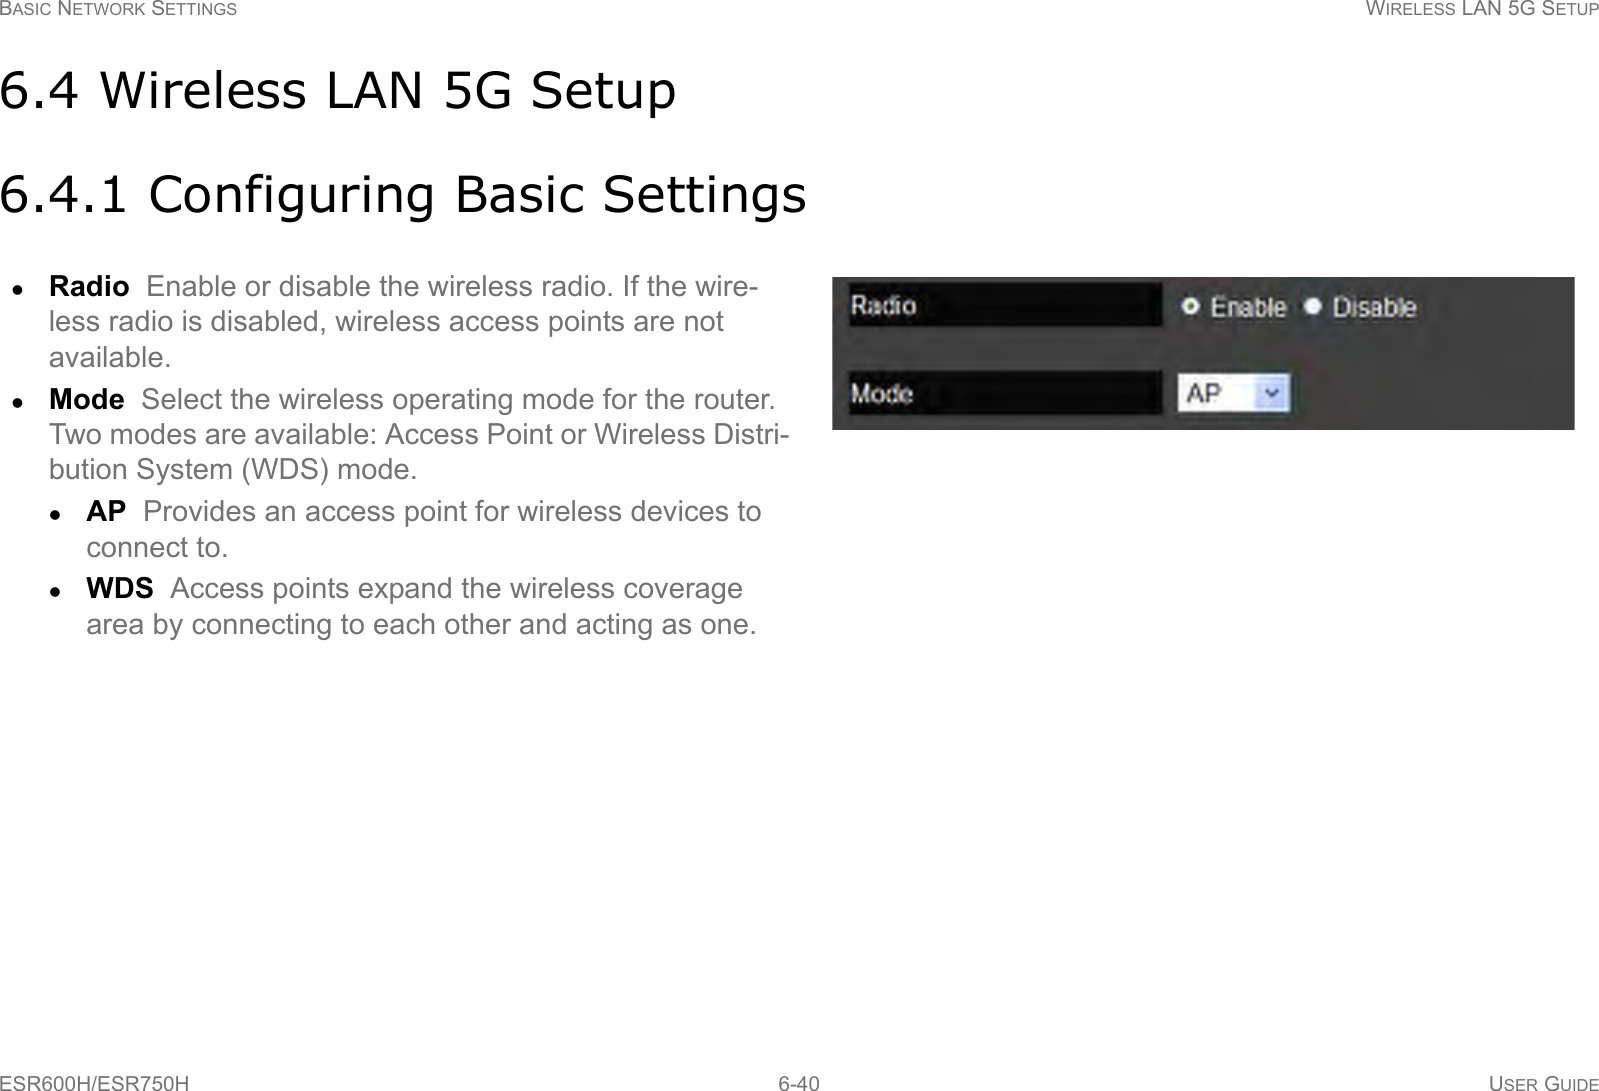 BASIC NETWORK SETTINGS WIRELESS LAN 5G SETUPESR600H/ESR750H 6-40 USER GUIDE6.4 Wireless LAN 5G Setup6.4.1 Configuring Basic SettingsRadio  Enable or disable the wireless radio. If the wire-less radio is disabled, wireless access points are not available.Mode  Select the wireless operating mode for the router. Two modes are available: Access Point or Wireless Distri-bution System (WDS) mode.AP  Provides an access point for wireless devices to connect to.WDS  Access points expand the wireless coverage area by connecting to each other and acting as one.